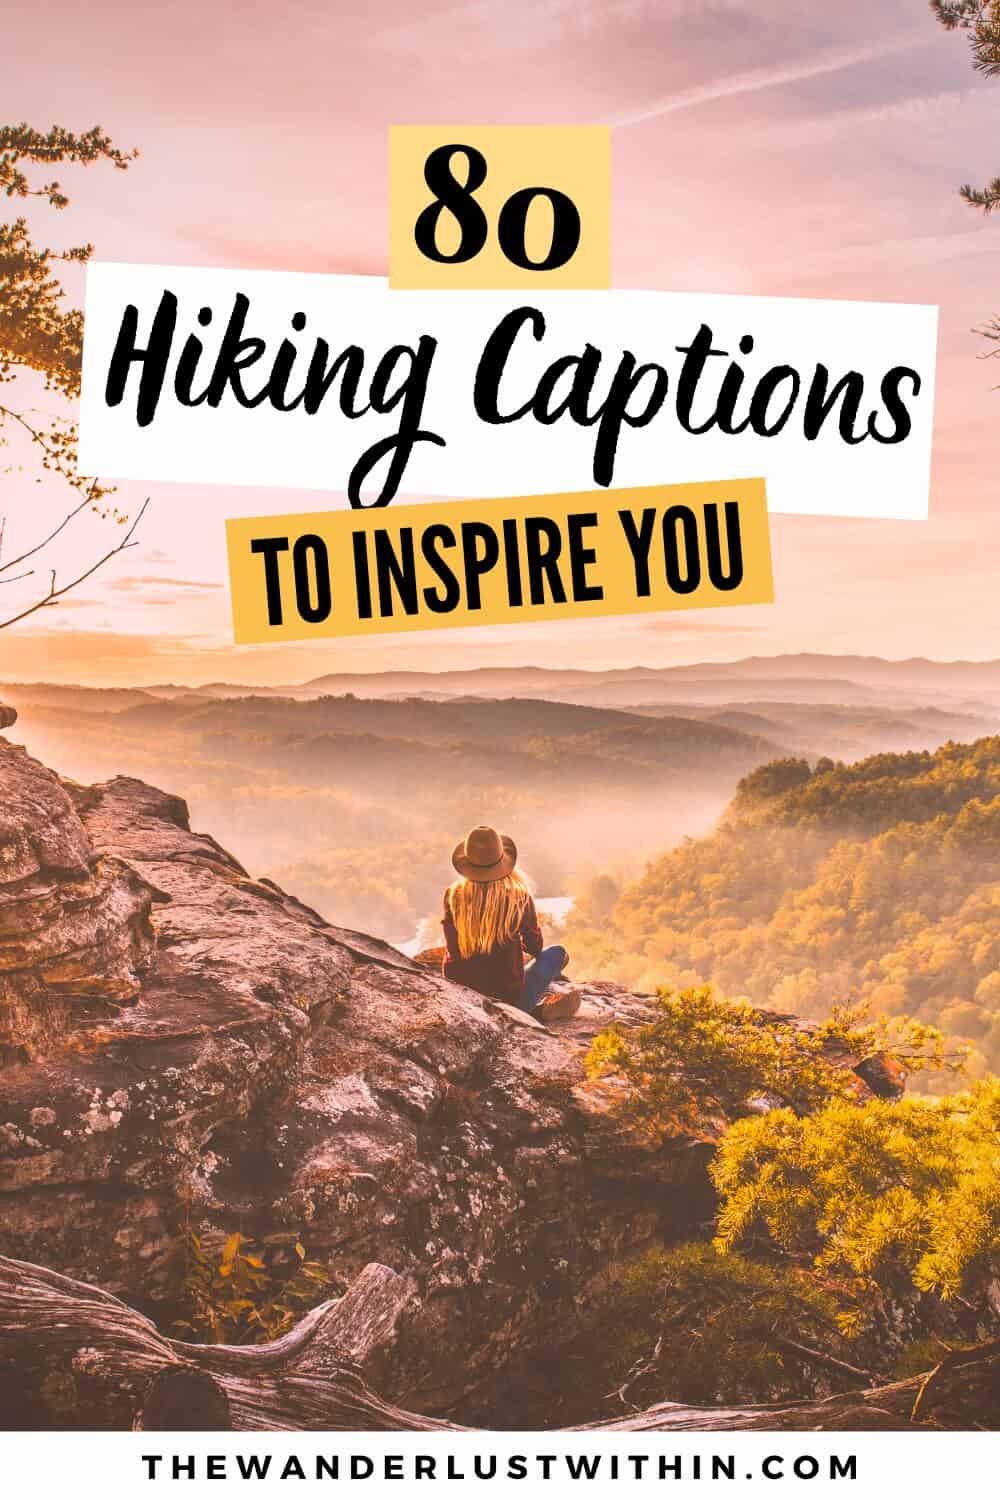 120 Inspirational Hiking Quotes For Adventurers 2023 - The Wanderlust Within